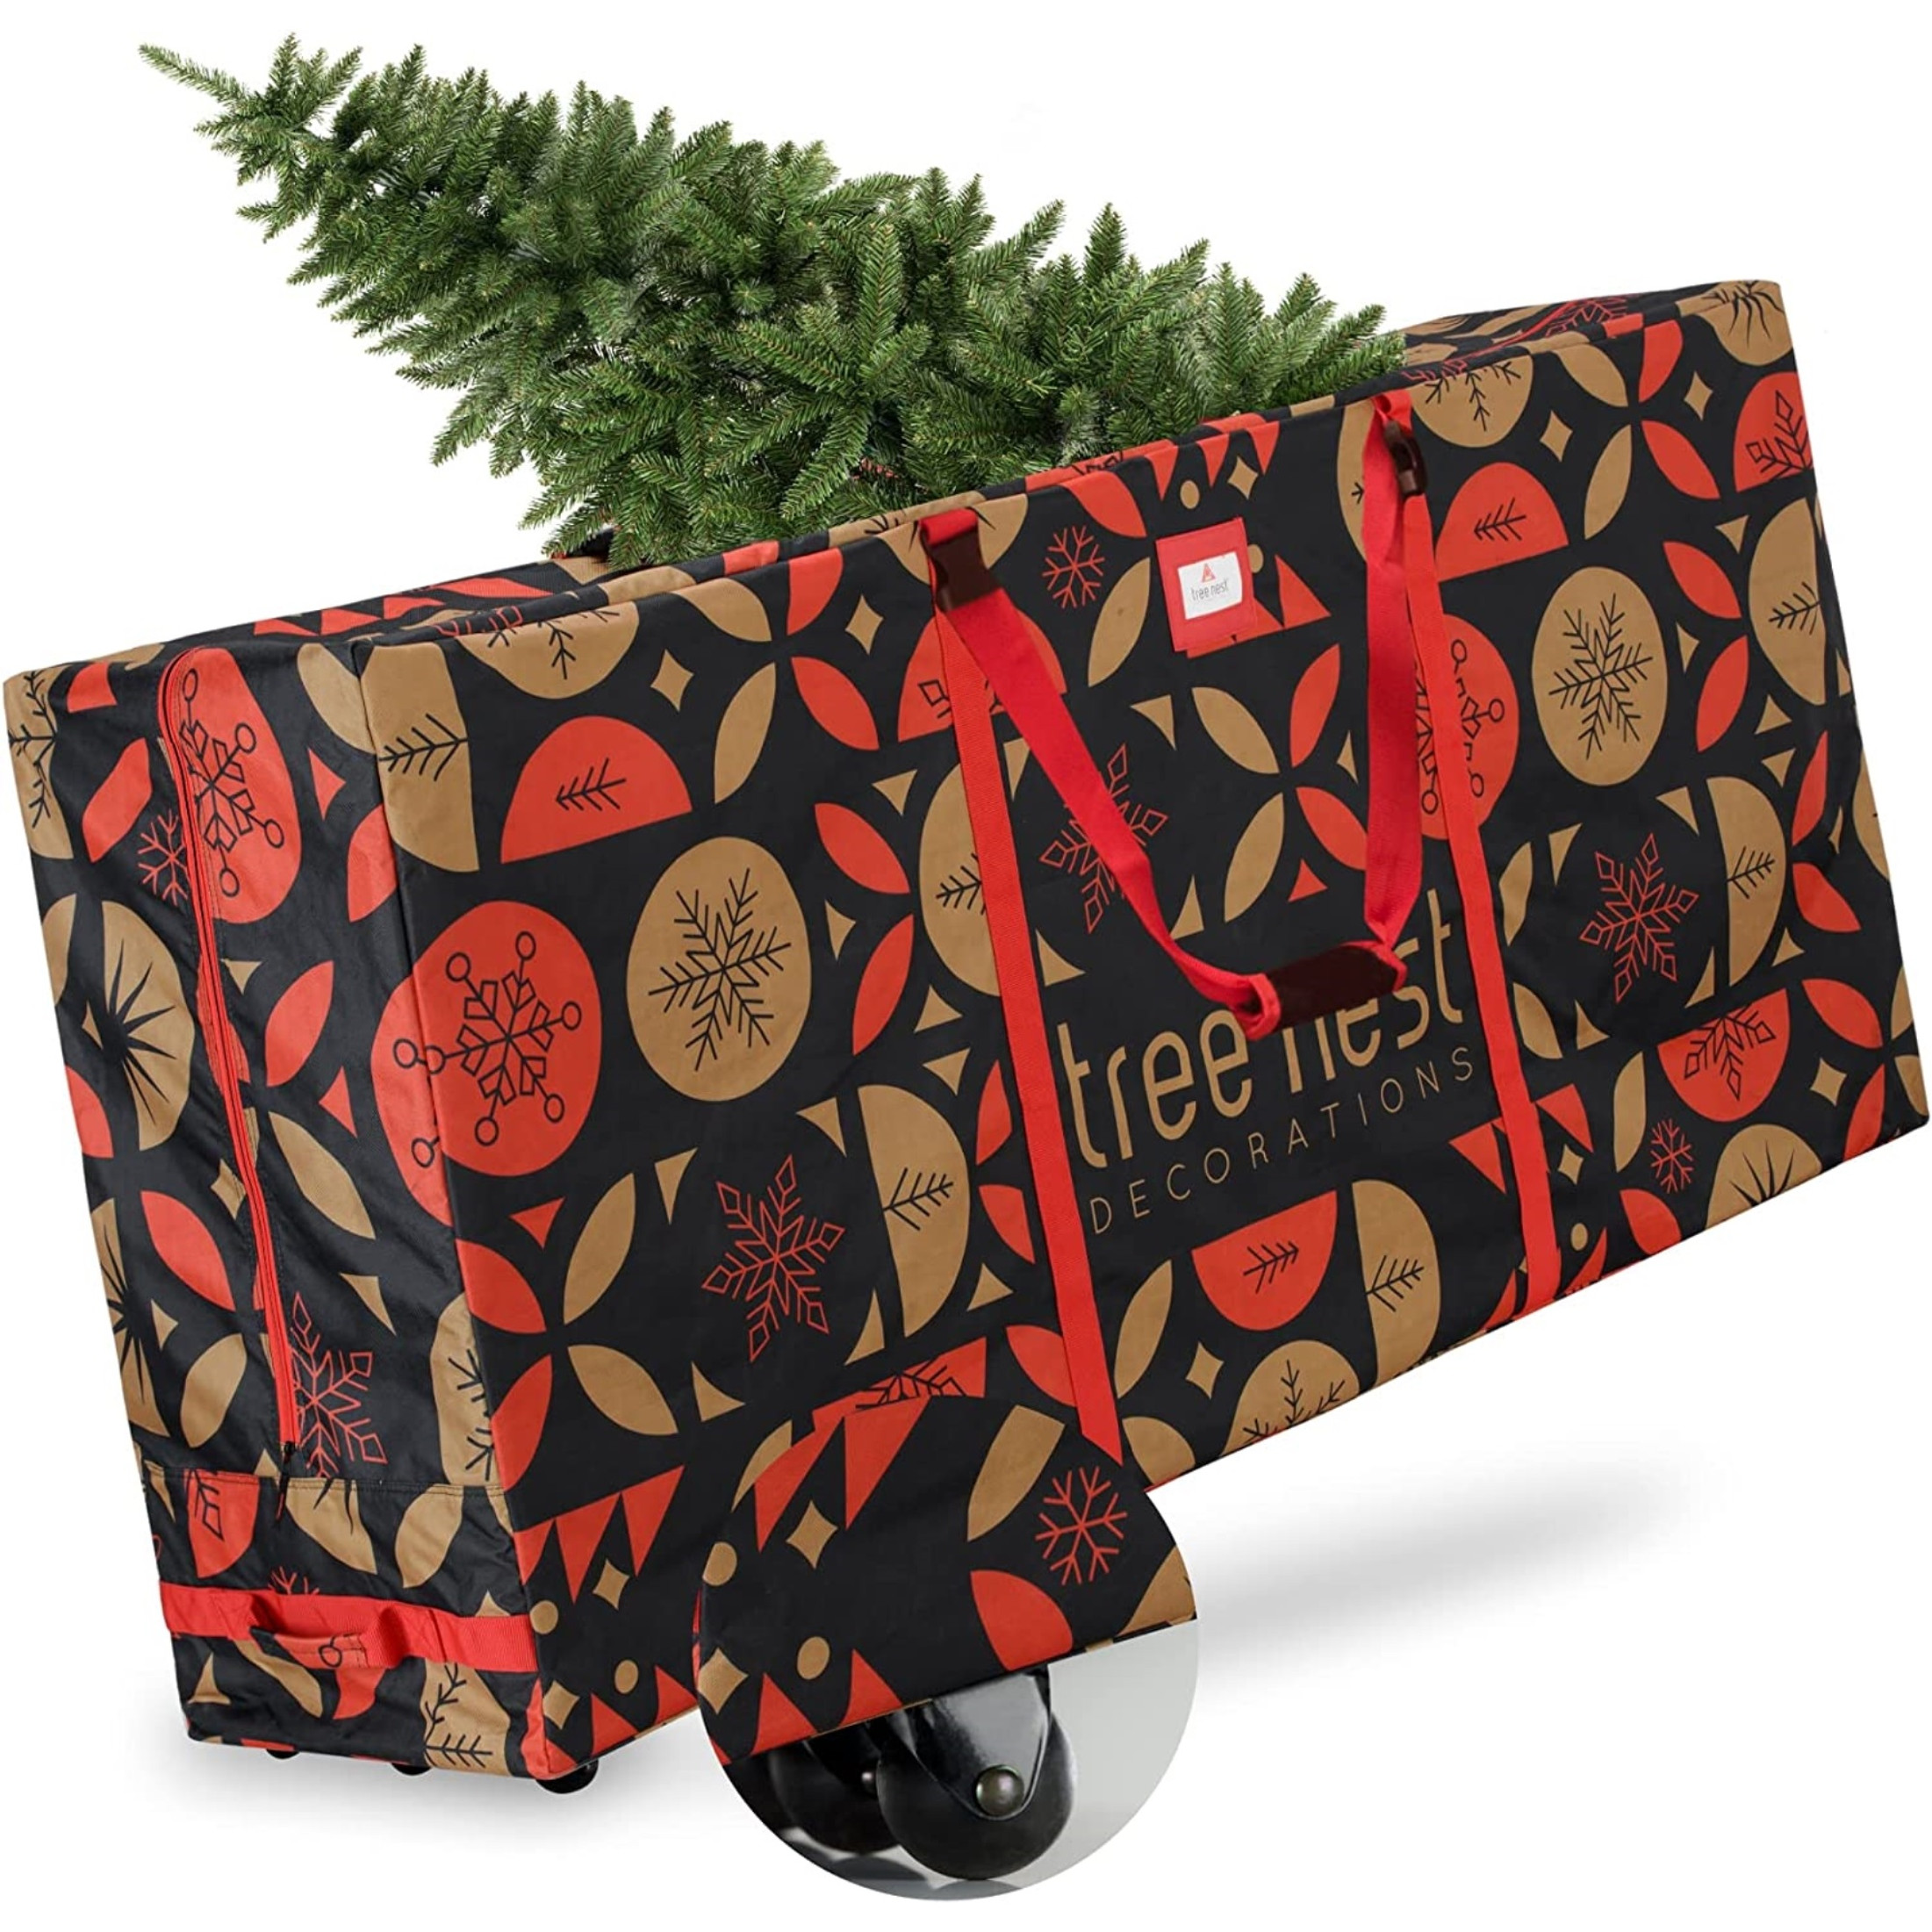 Tree Nest Rolling Christmas Tree Storage Bag, Stylish Canvas Christmas Tree Box for Artificial Disassembled Trees 7.5ft